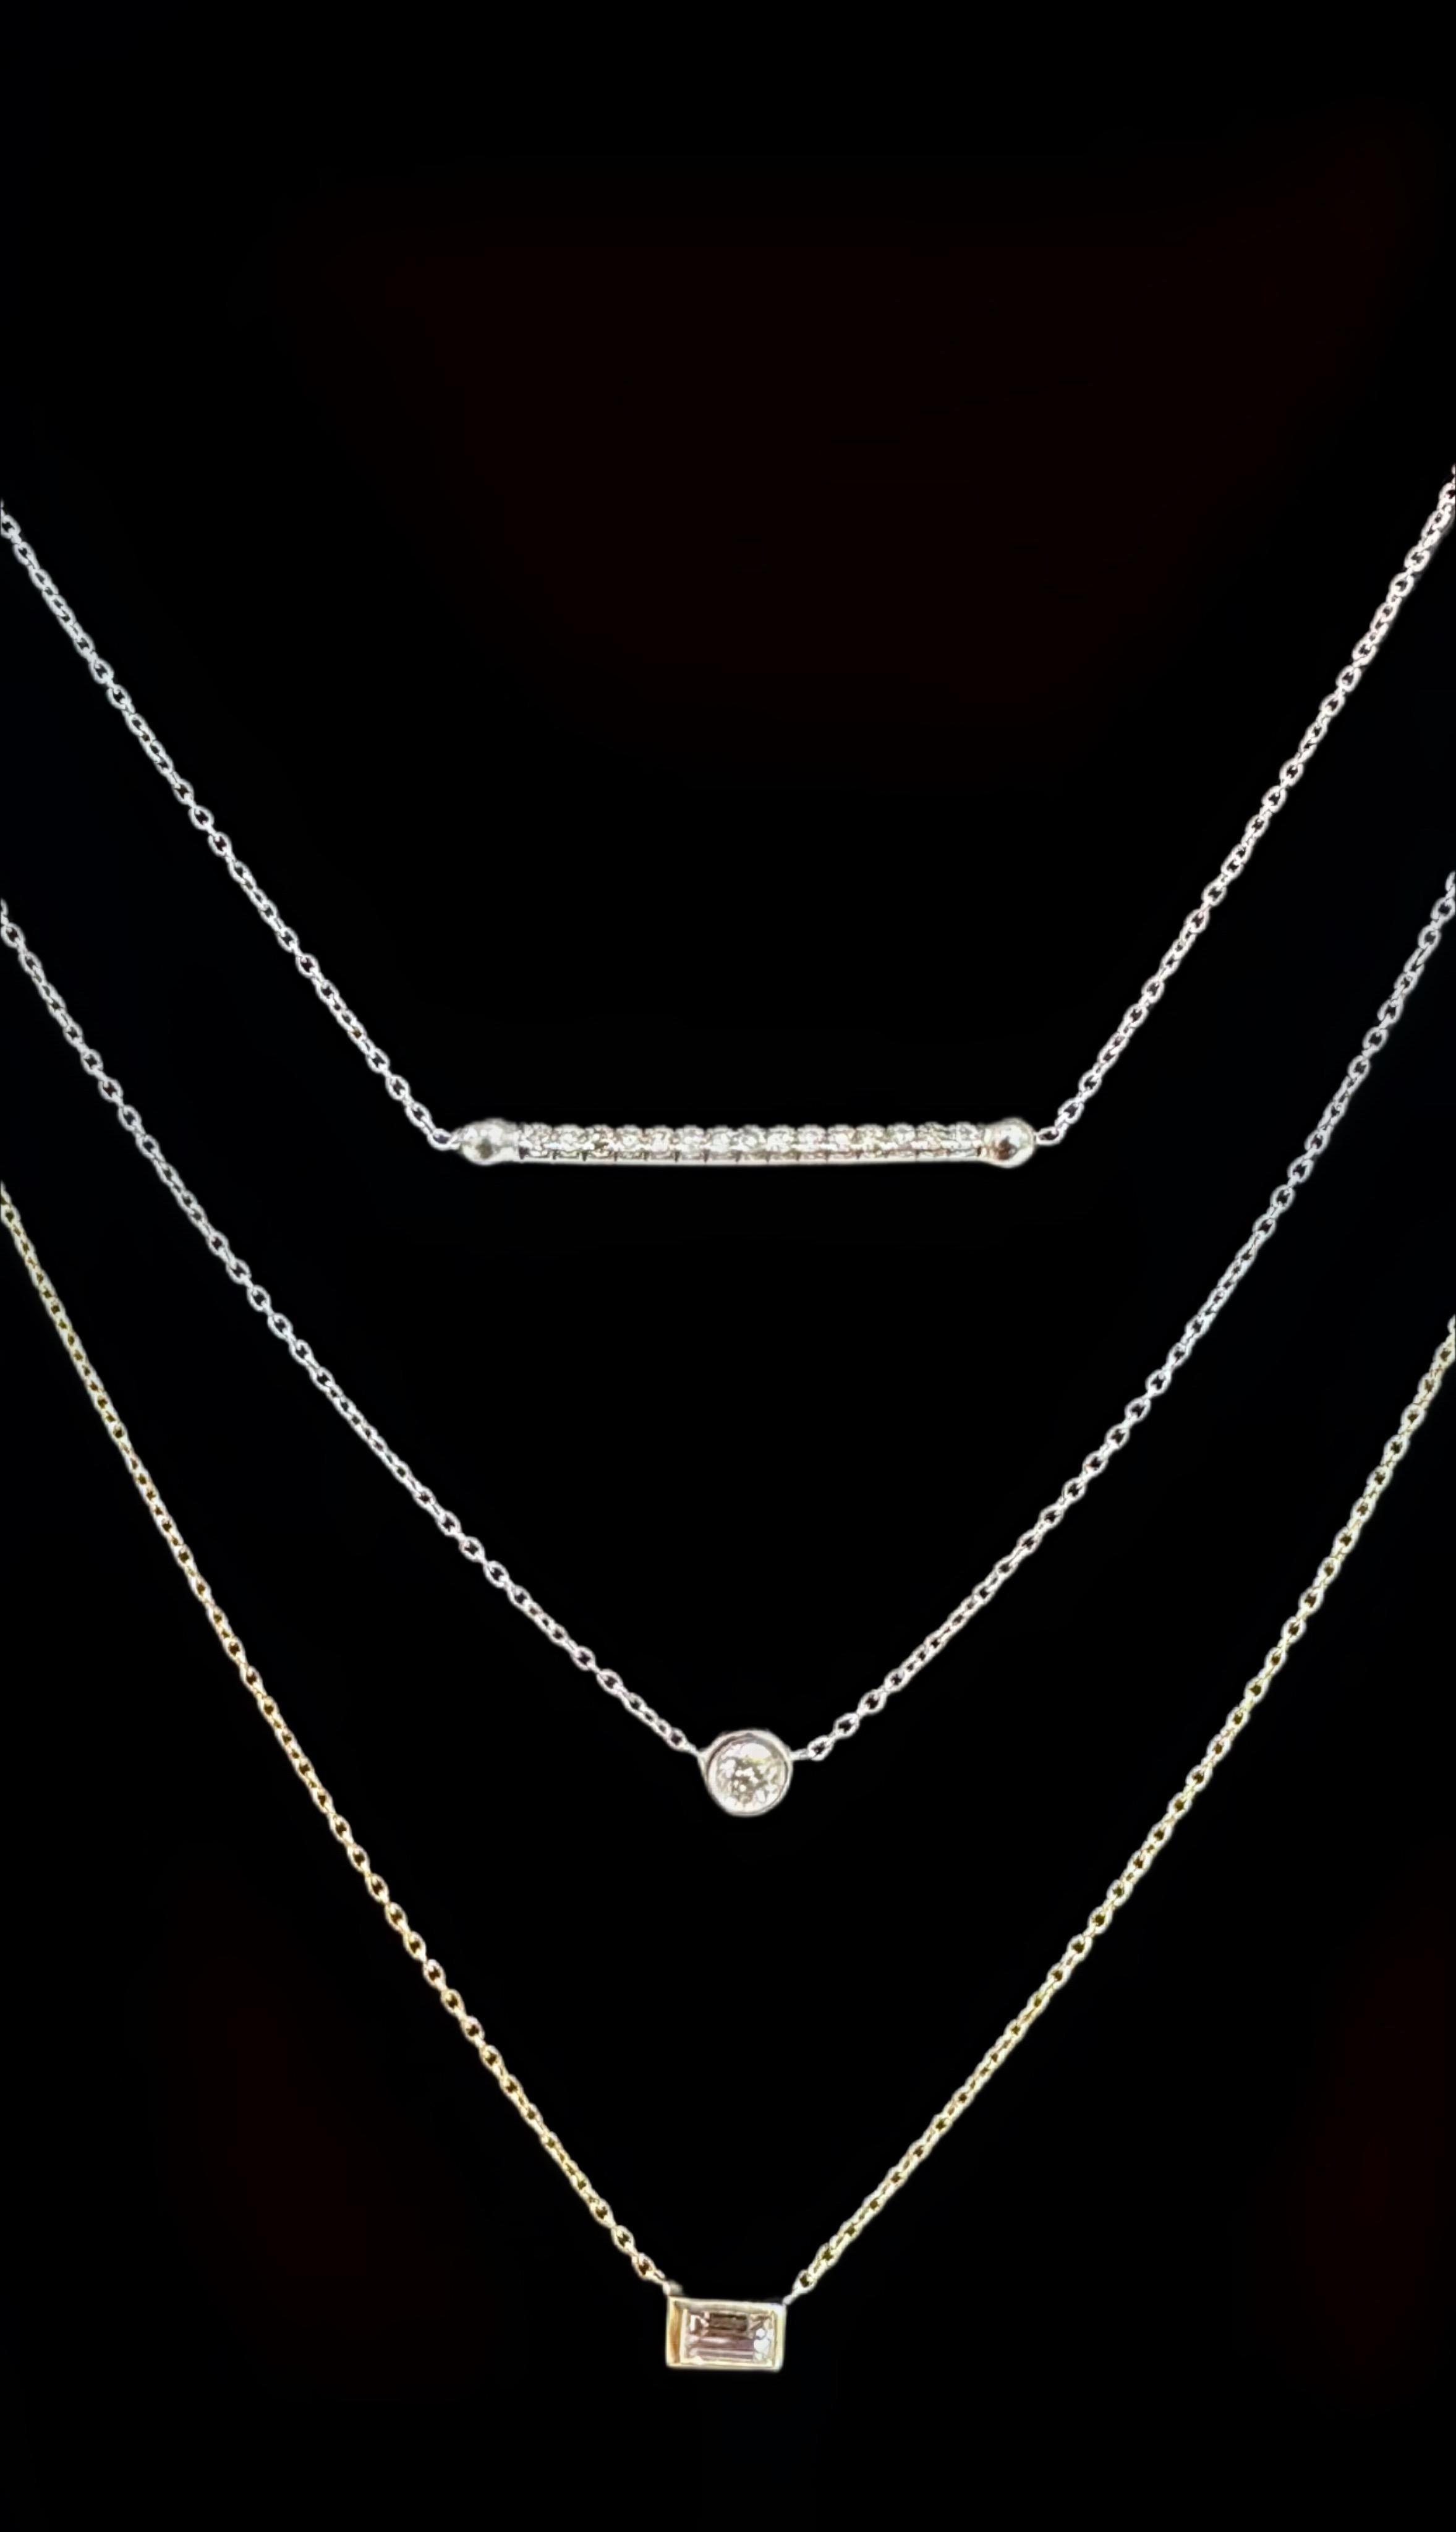 If you're still looking for gift ideas, this diamond bar necklace is a must! 